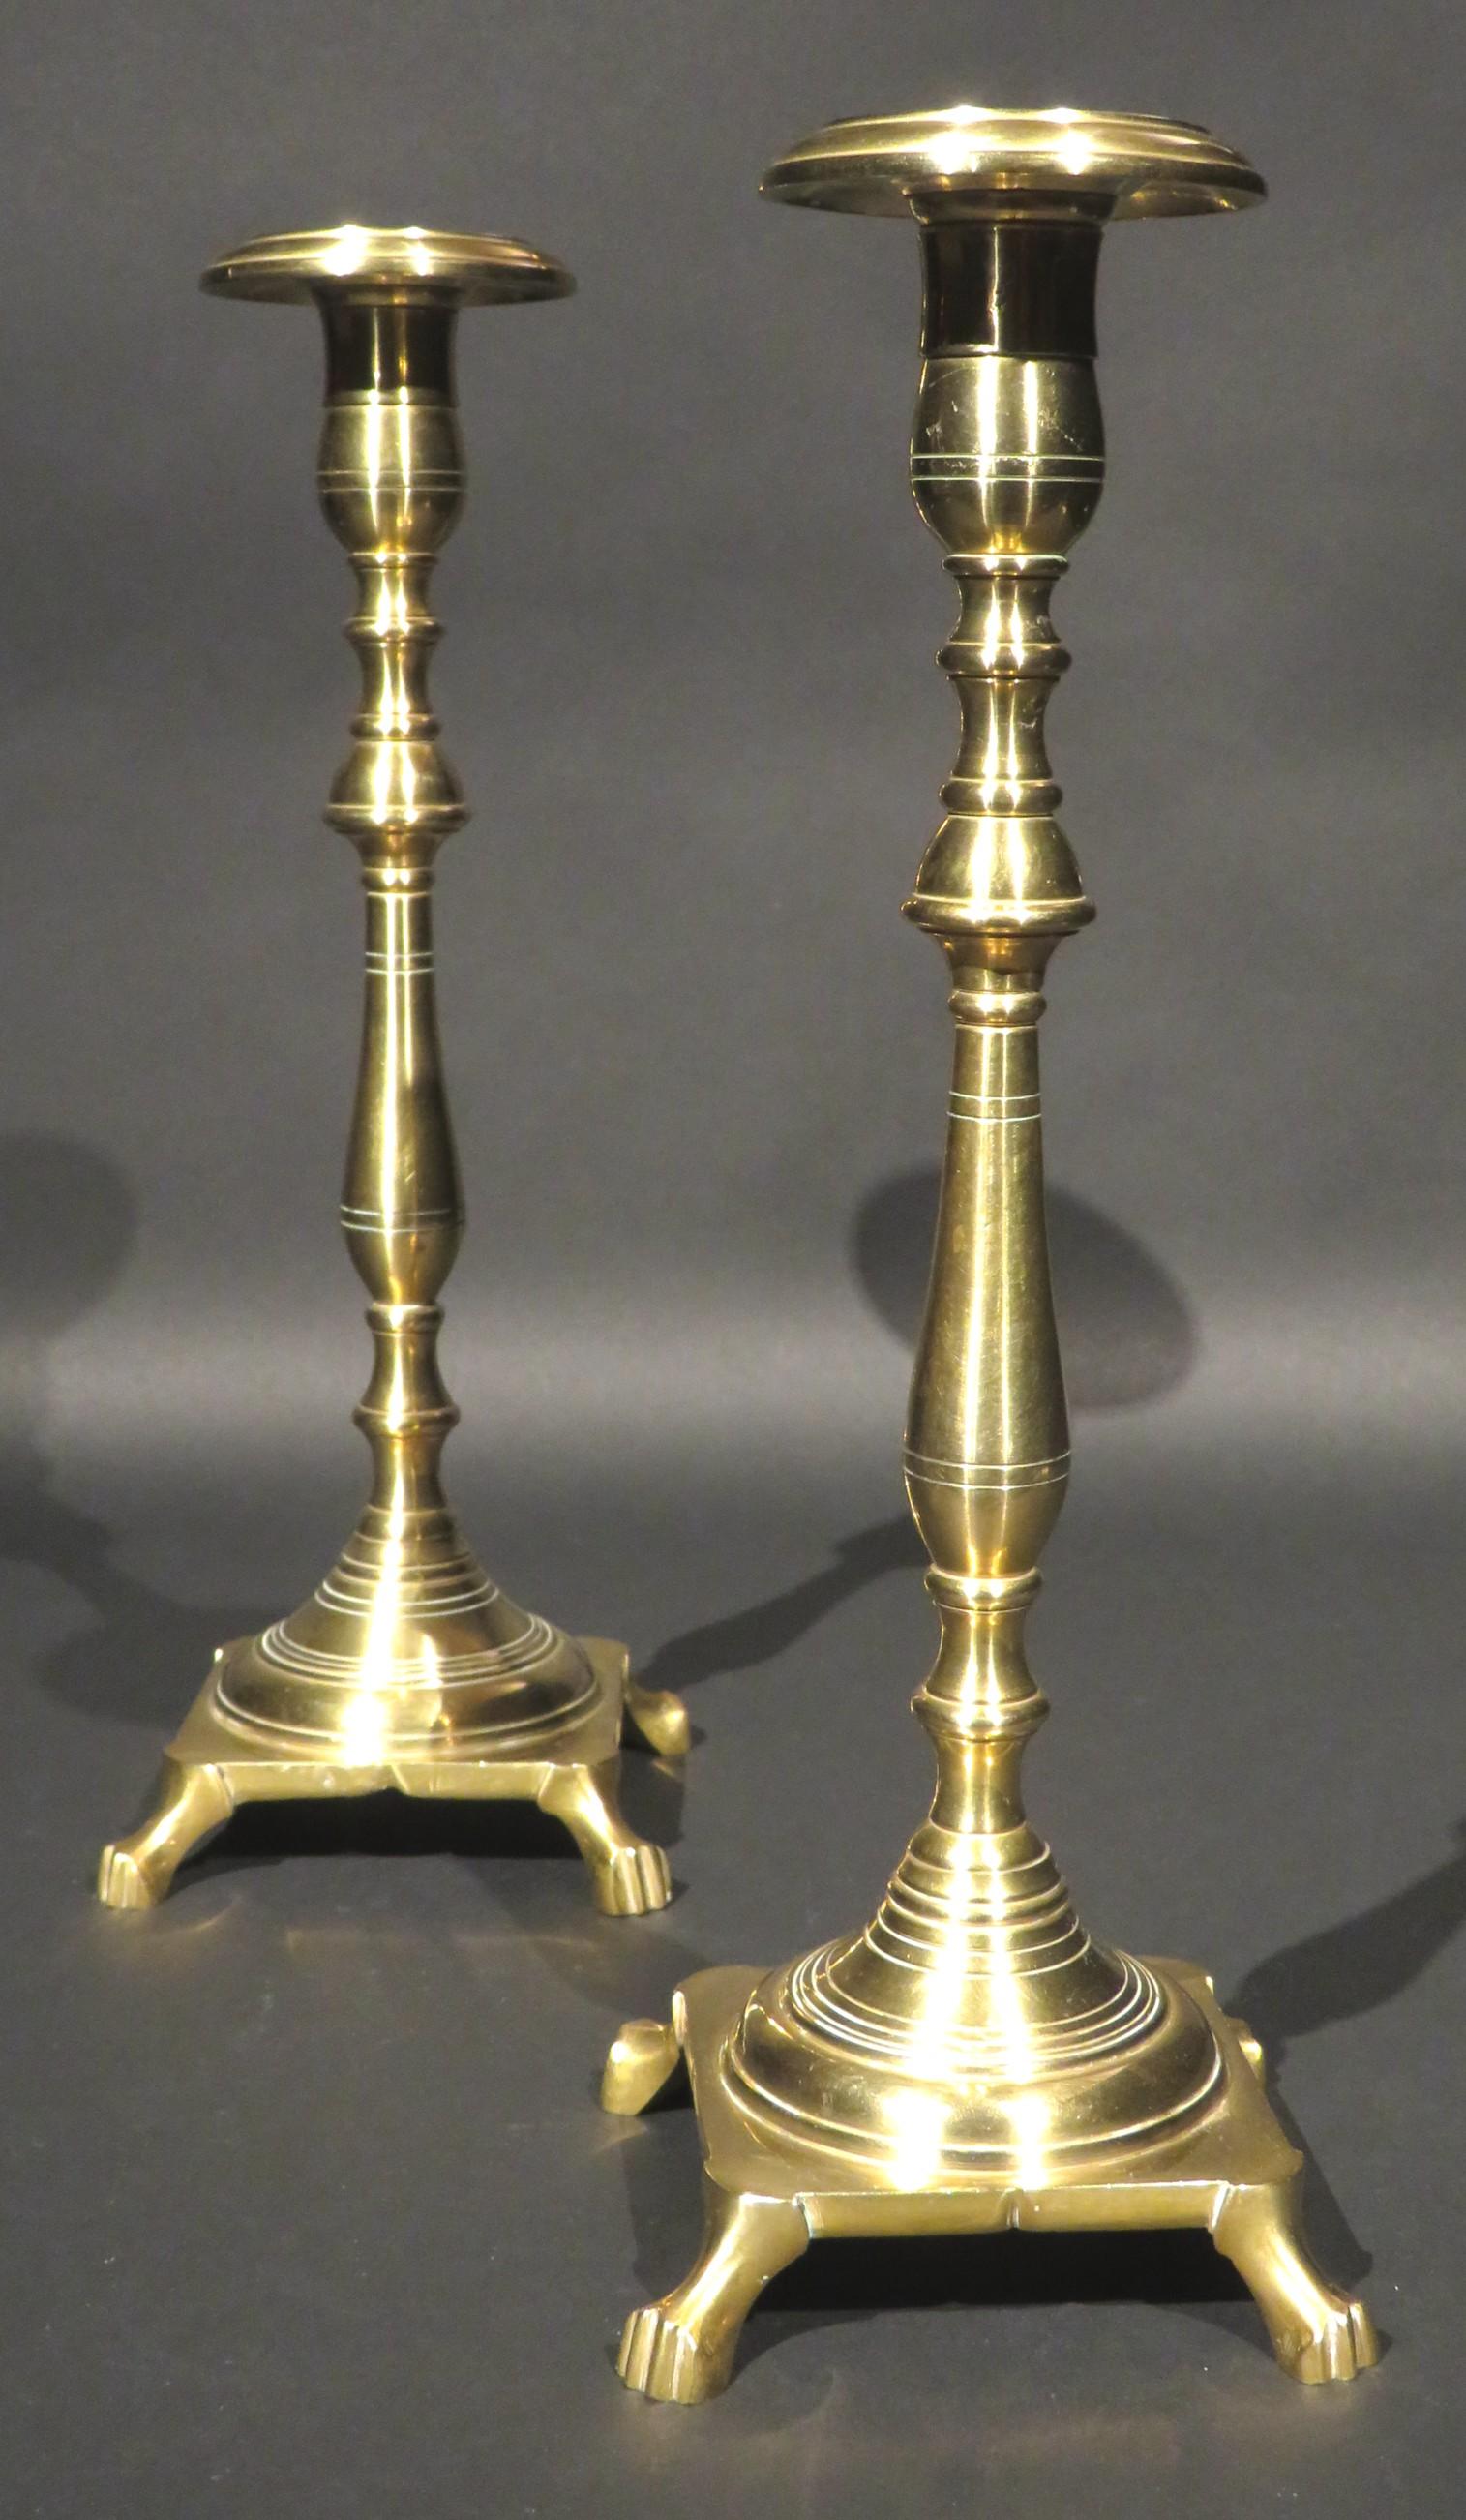 A very handsome & heavy pair of early 20th century cast brass Shabbat candlesticks. Both cast in two sections showing turned columns rising to urn-shaped nozzles with flaring drip pans, affixed to squared bases with notched decoration, raised upon